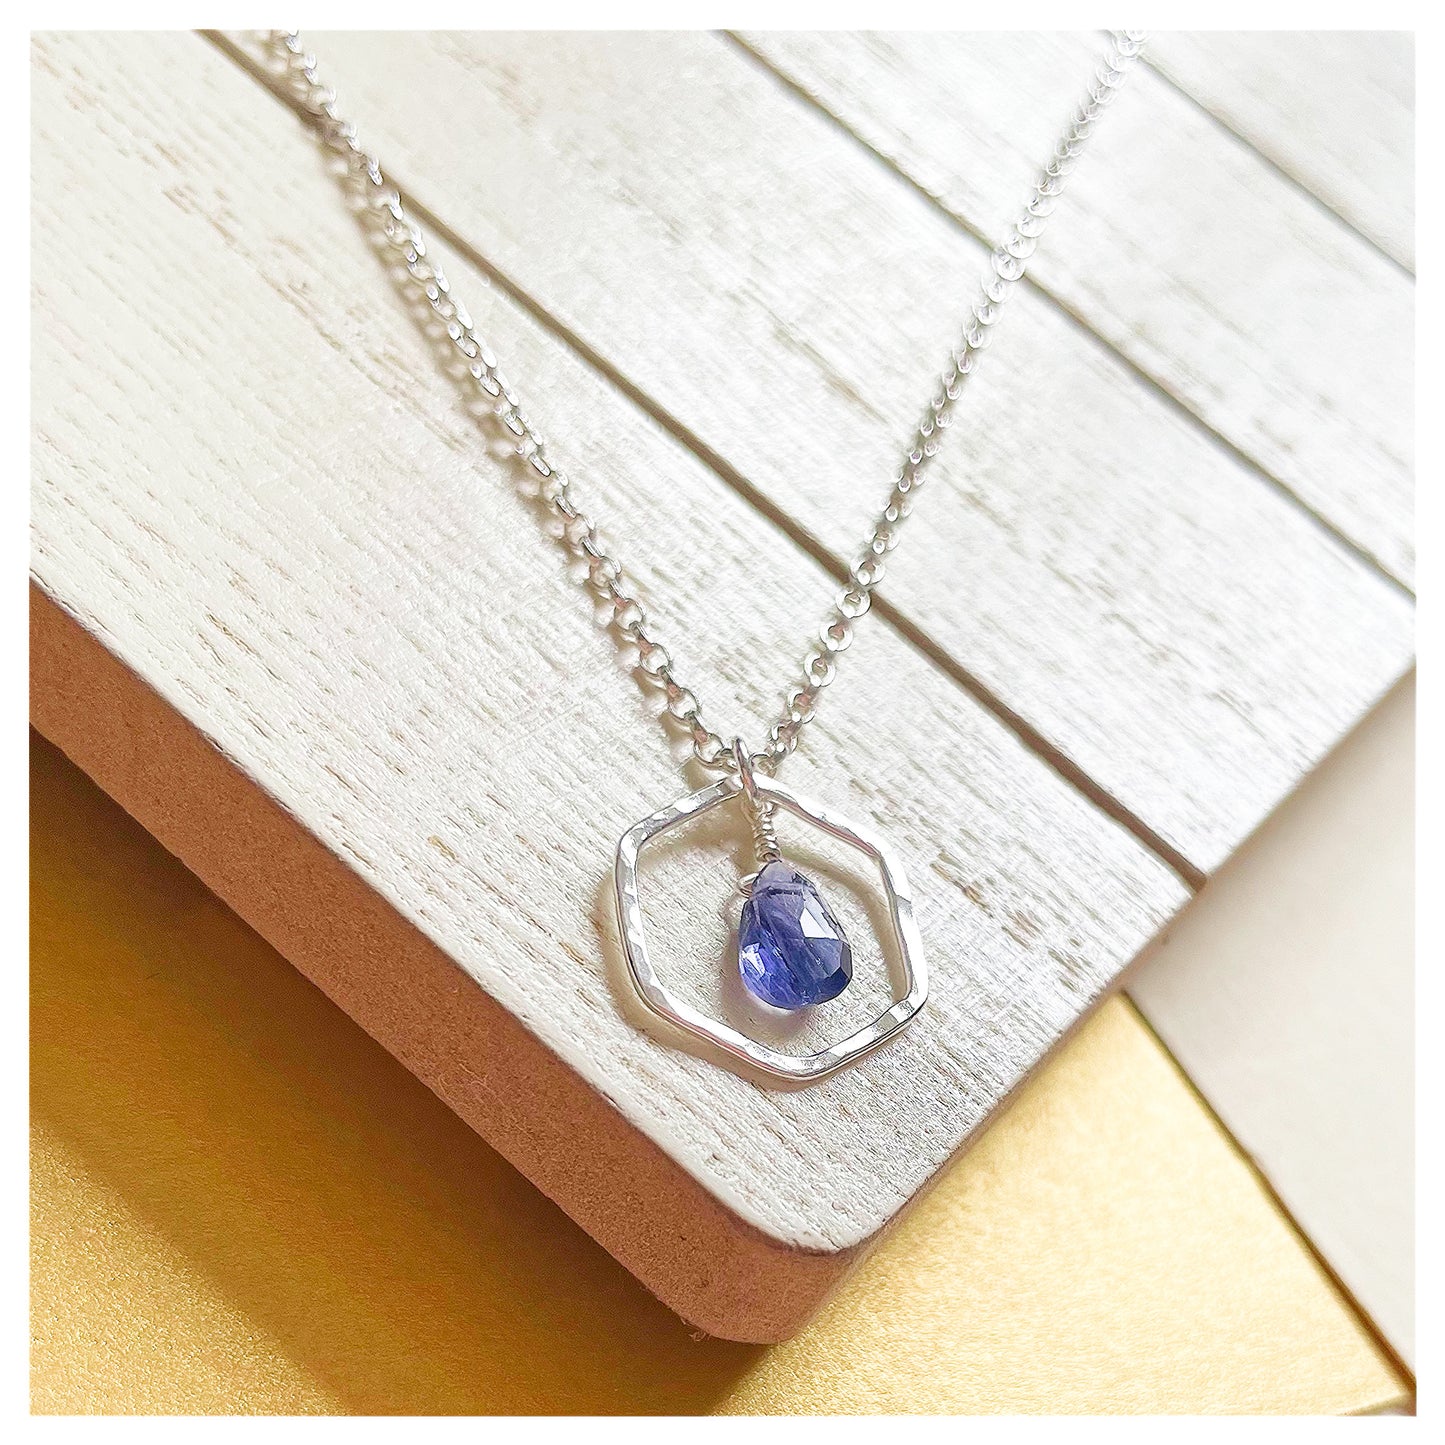 Mini Sterling Silver Hammered Hexagon and Iolite Briolette Necklace.